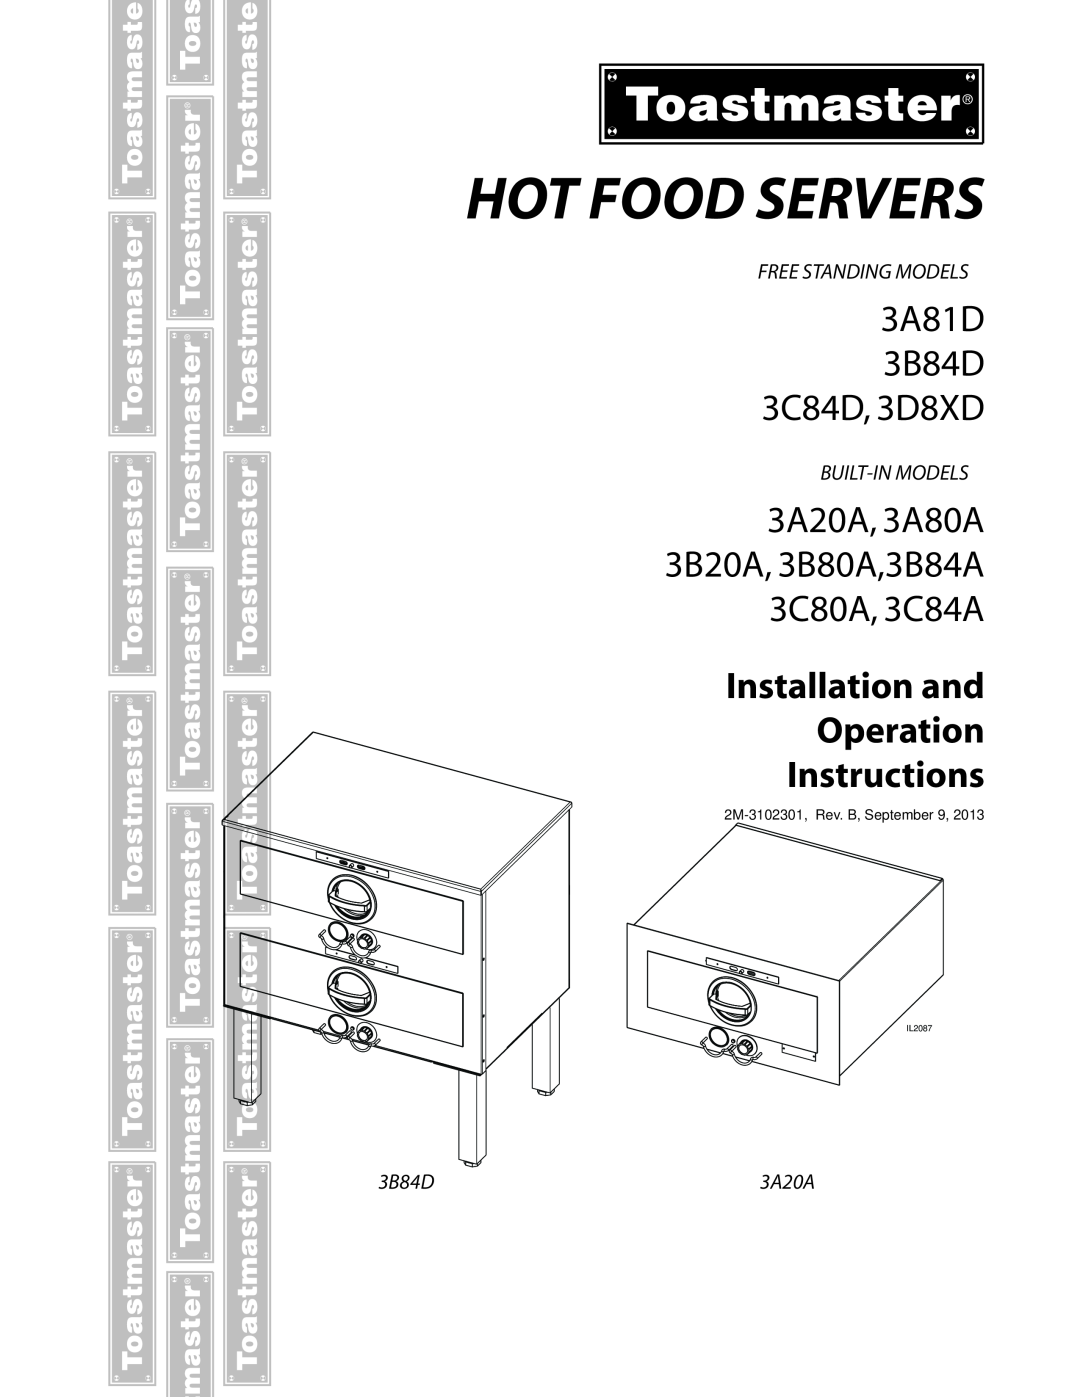 Toastmaster manual Hot Food Servers, 3A81D, Installation and Operation Instructions, 3B84D 3C84D, 3D8XD, Built-Inmodels 